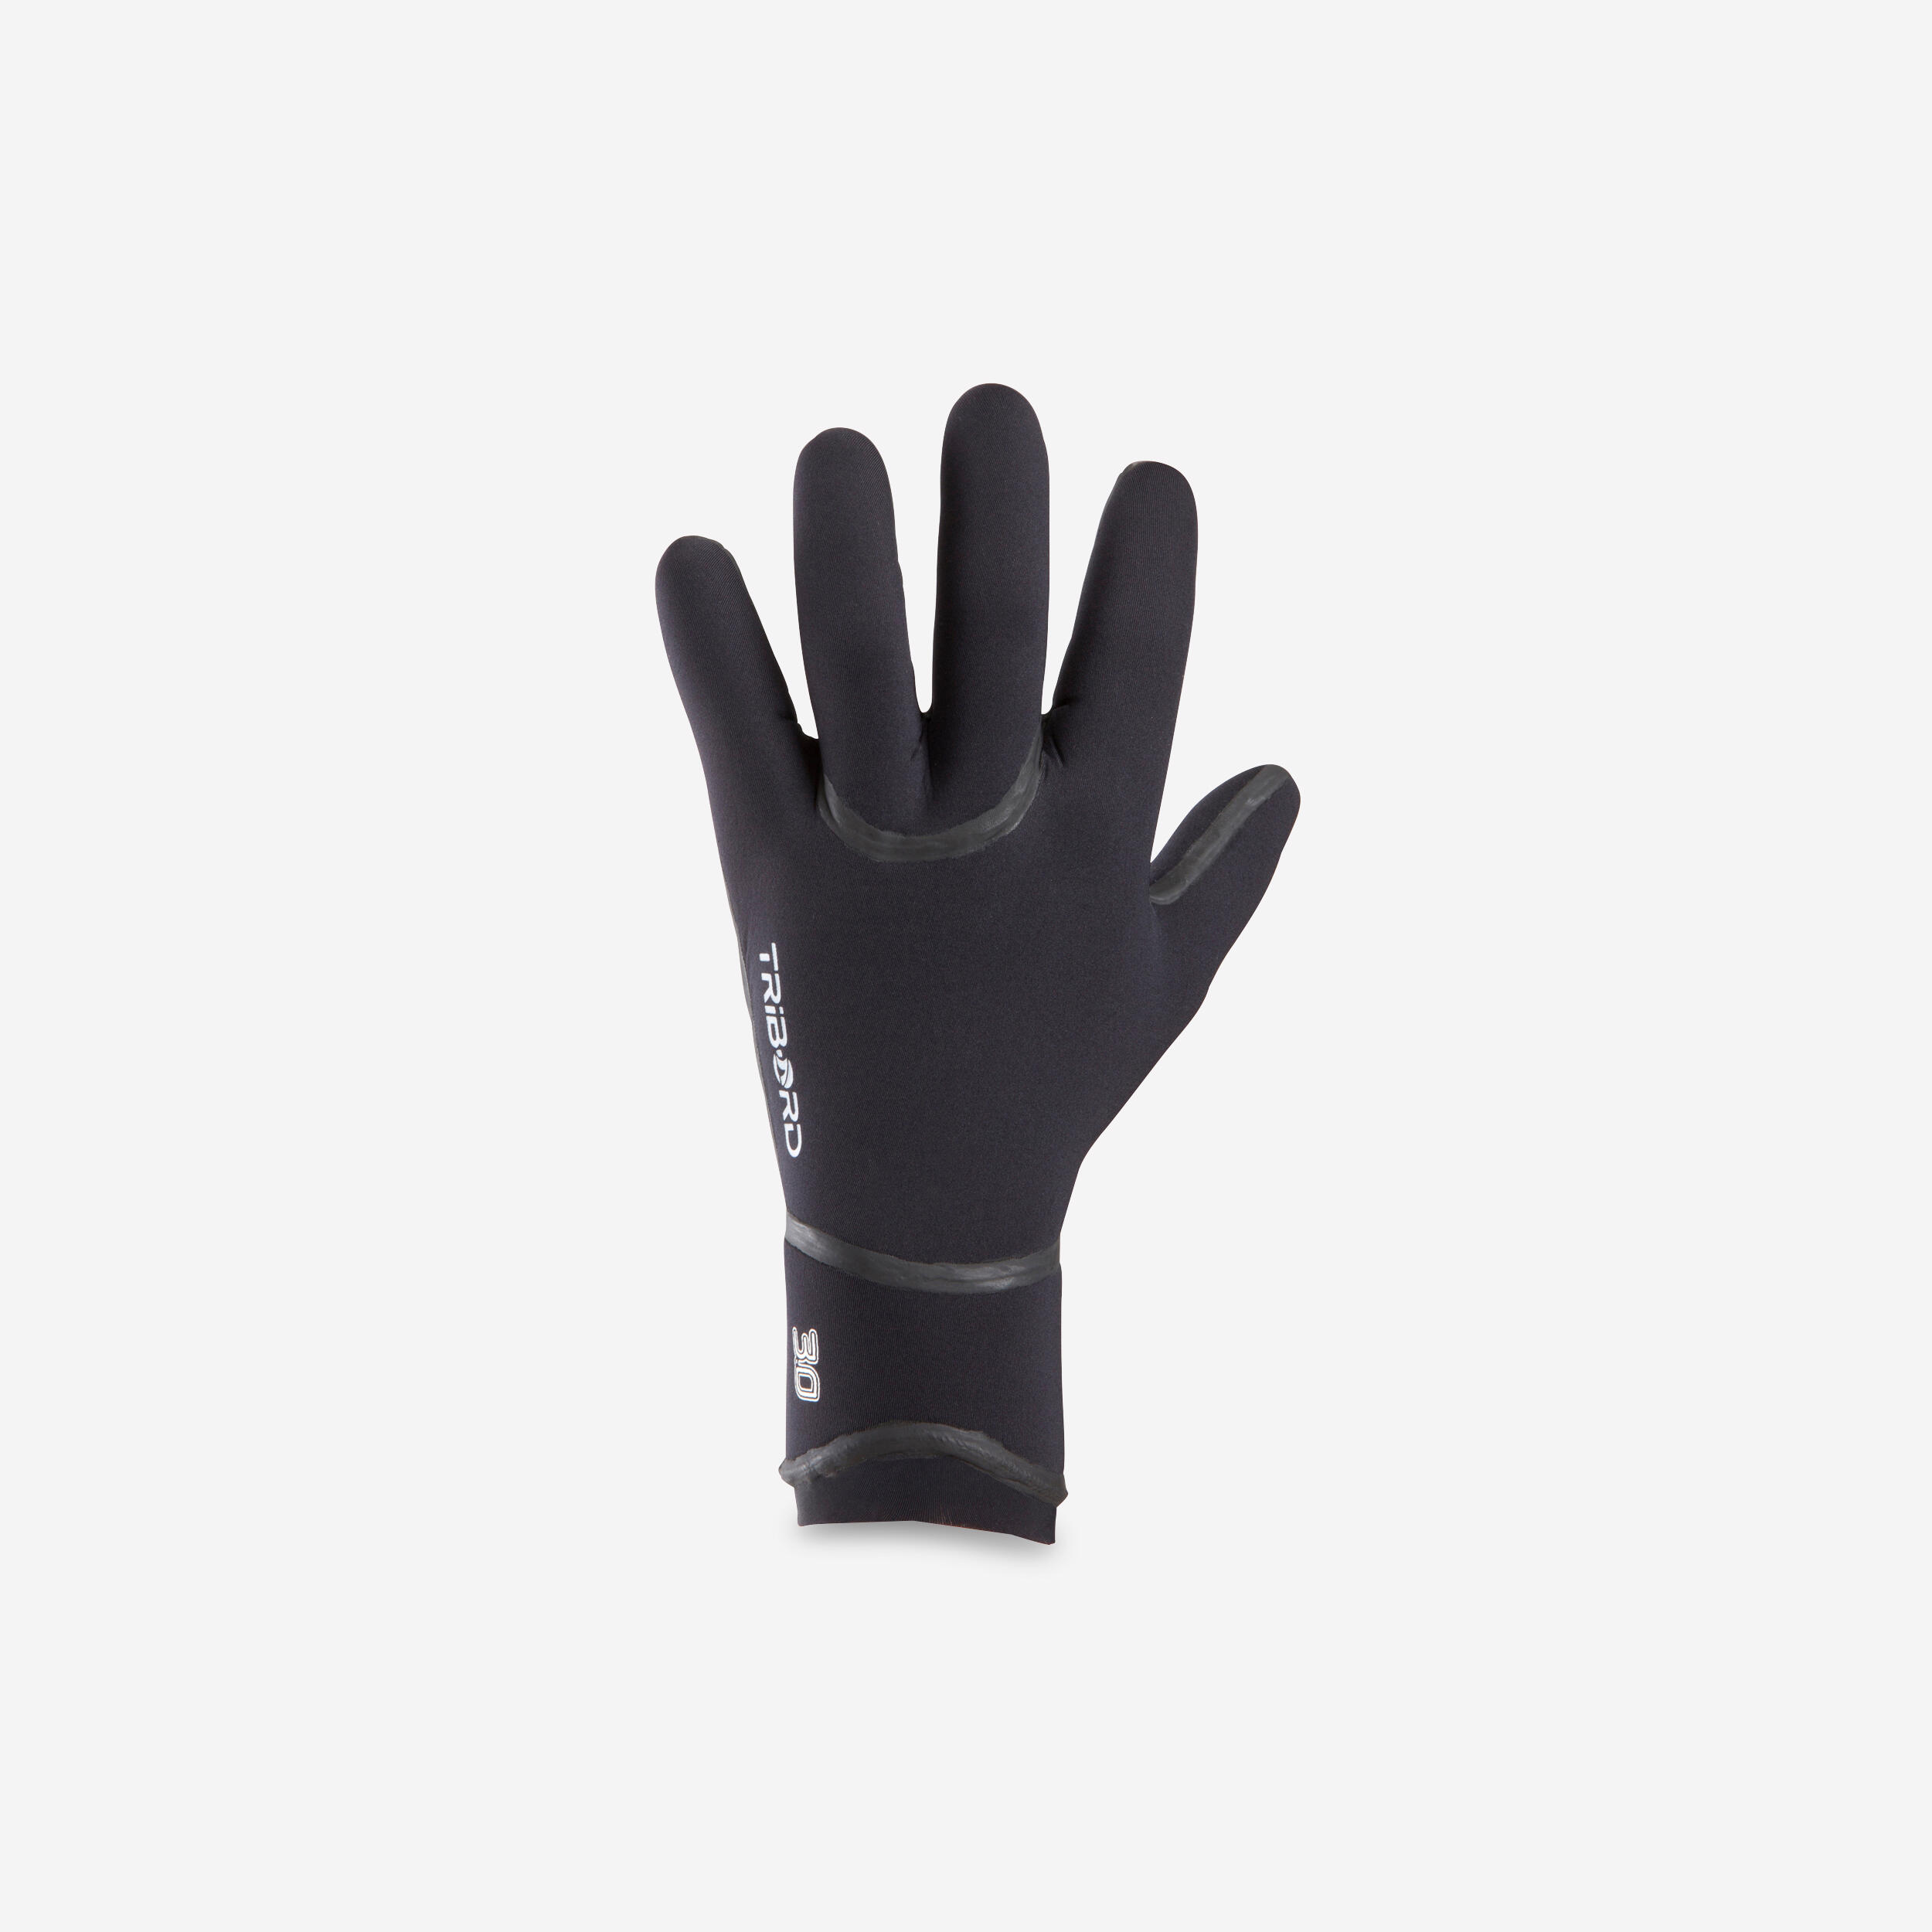 Fishing Neoprene Gloves Thermo with Three Opening Fingers 1 mm